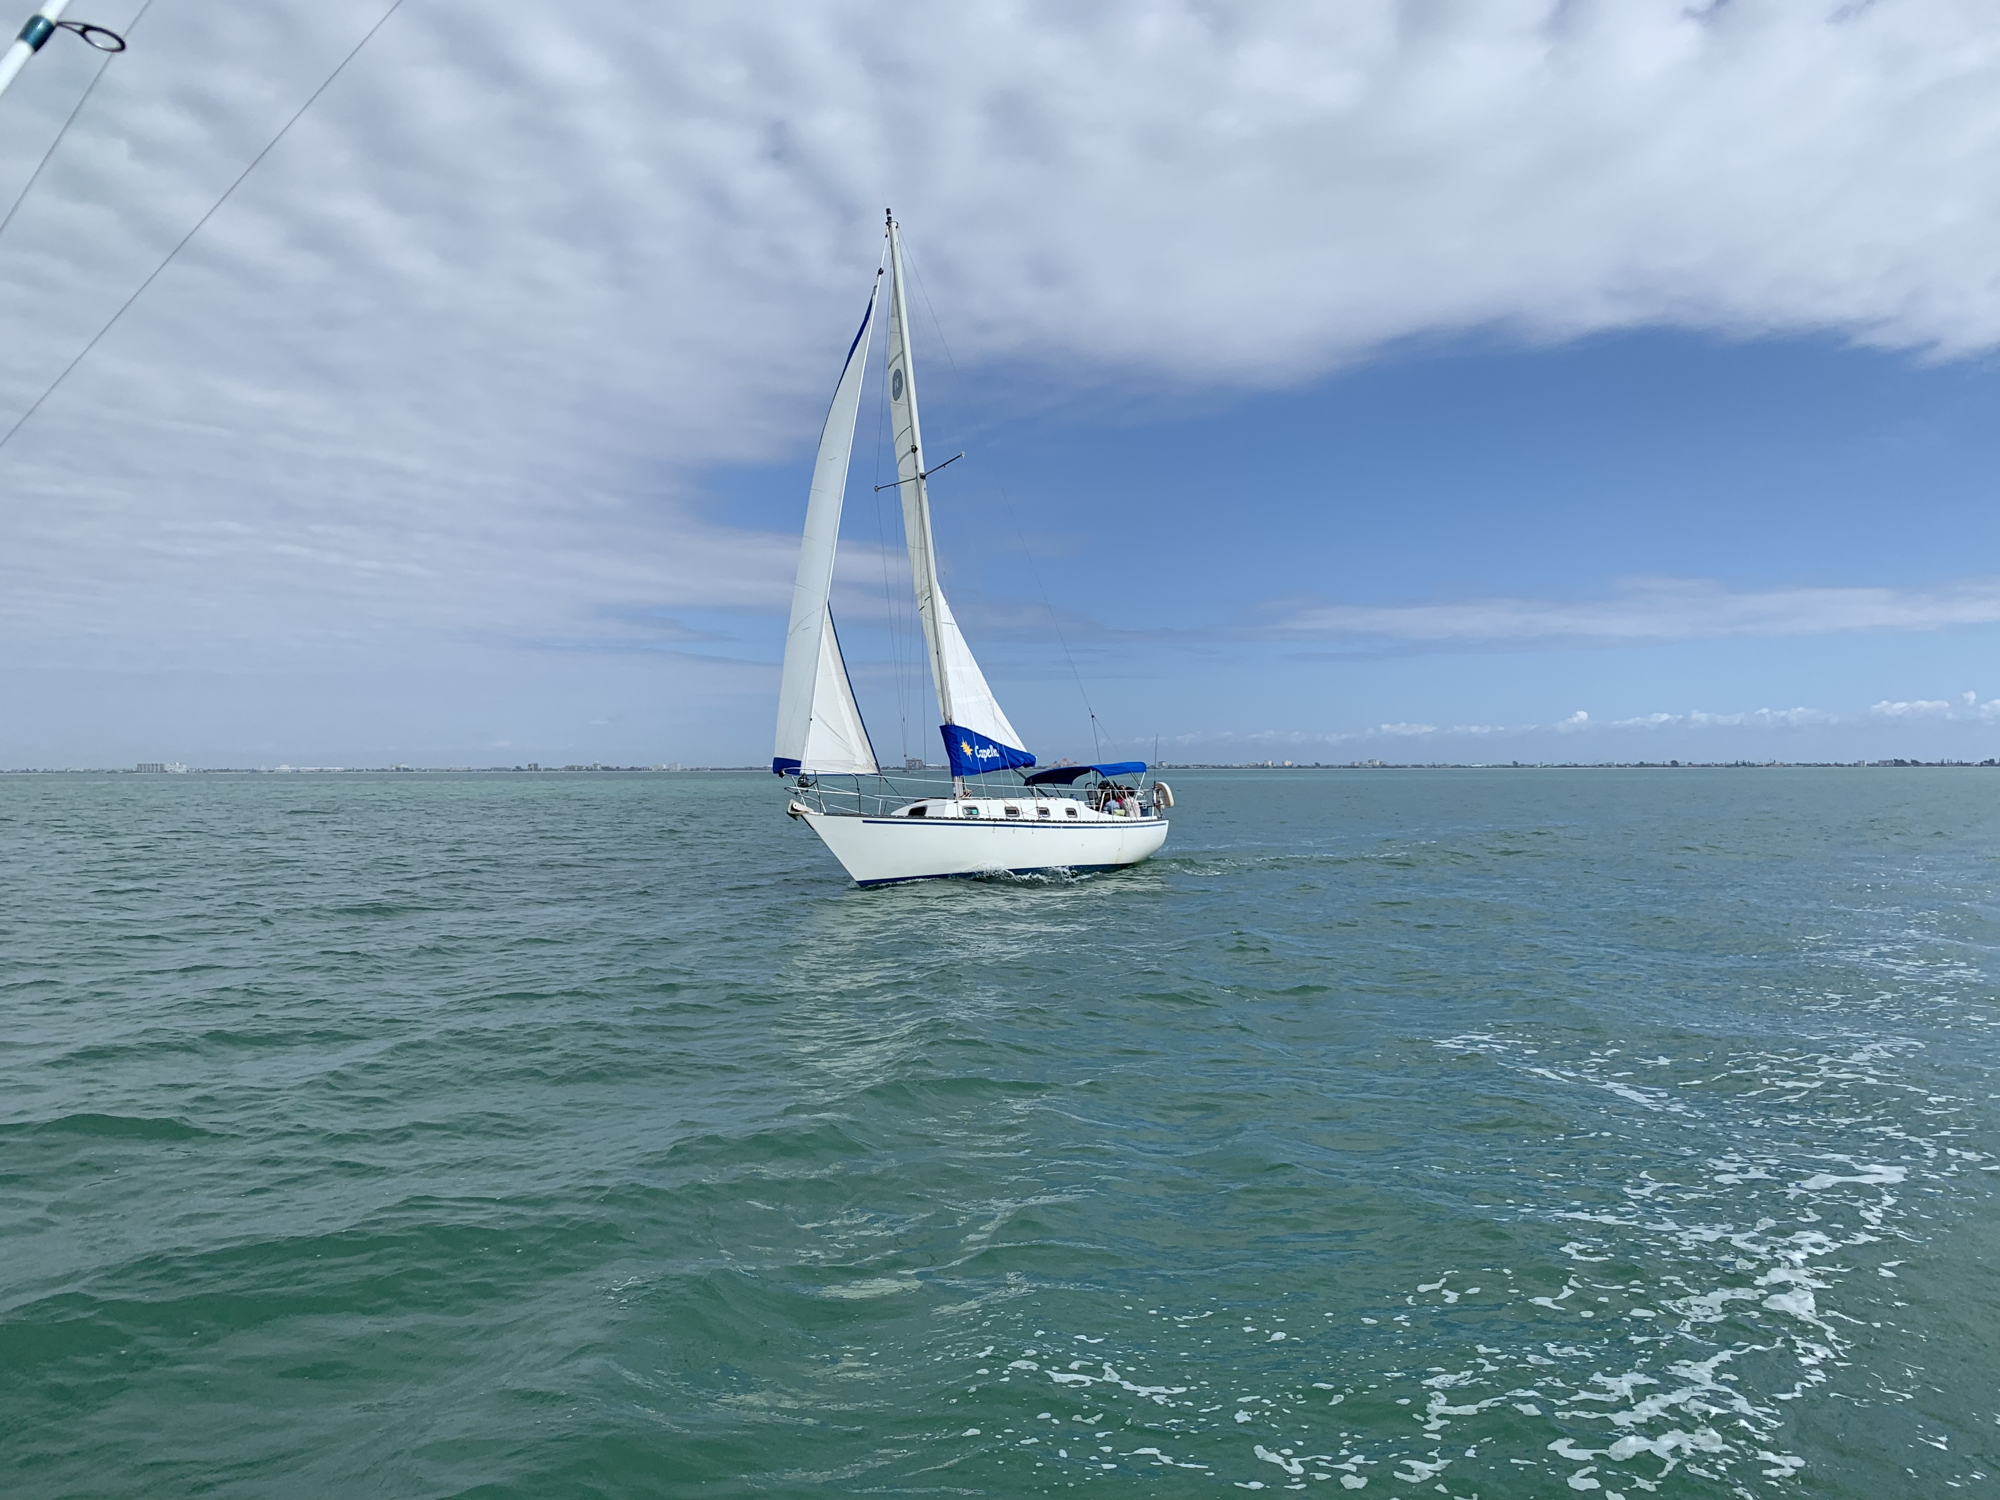 Courtesy. Capella under sail on the waters of the Gulf of Mexico.